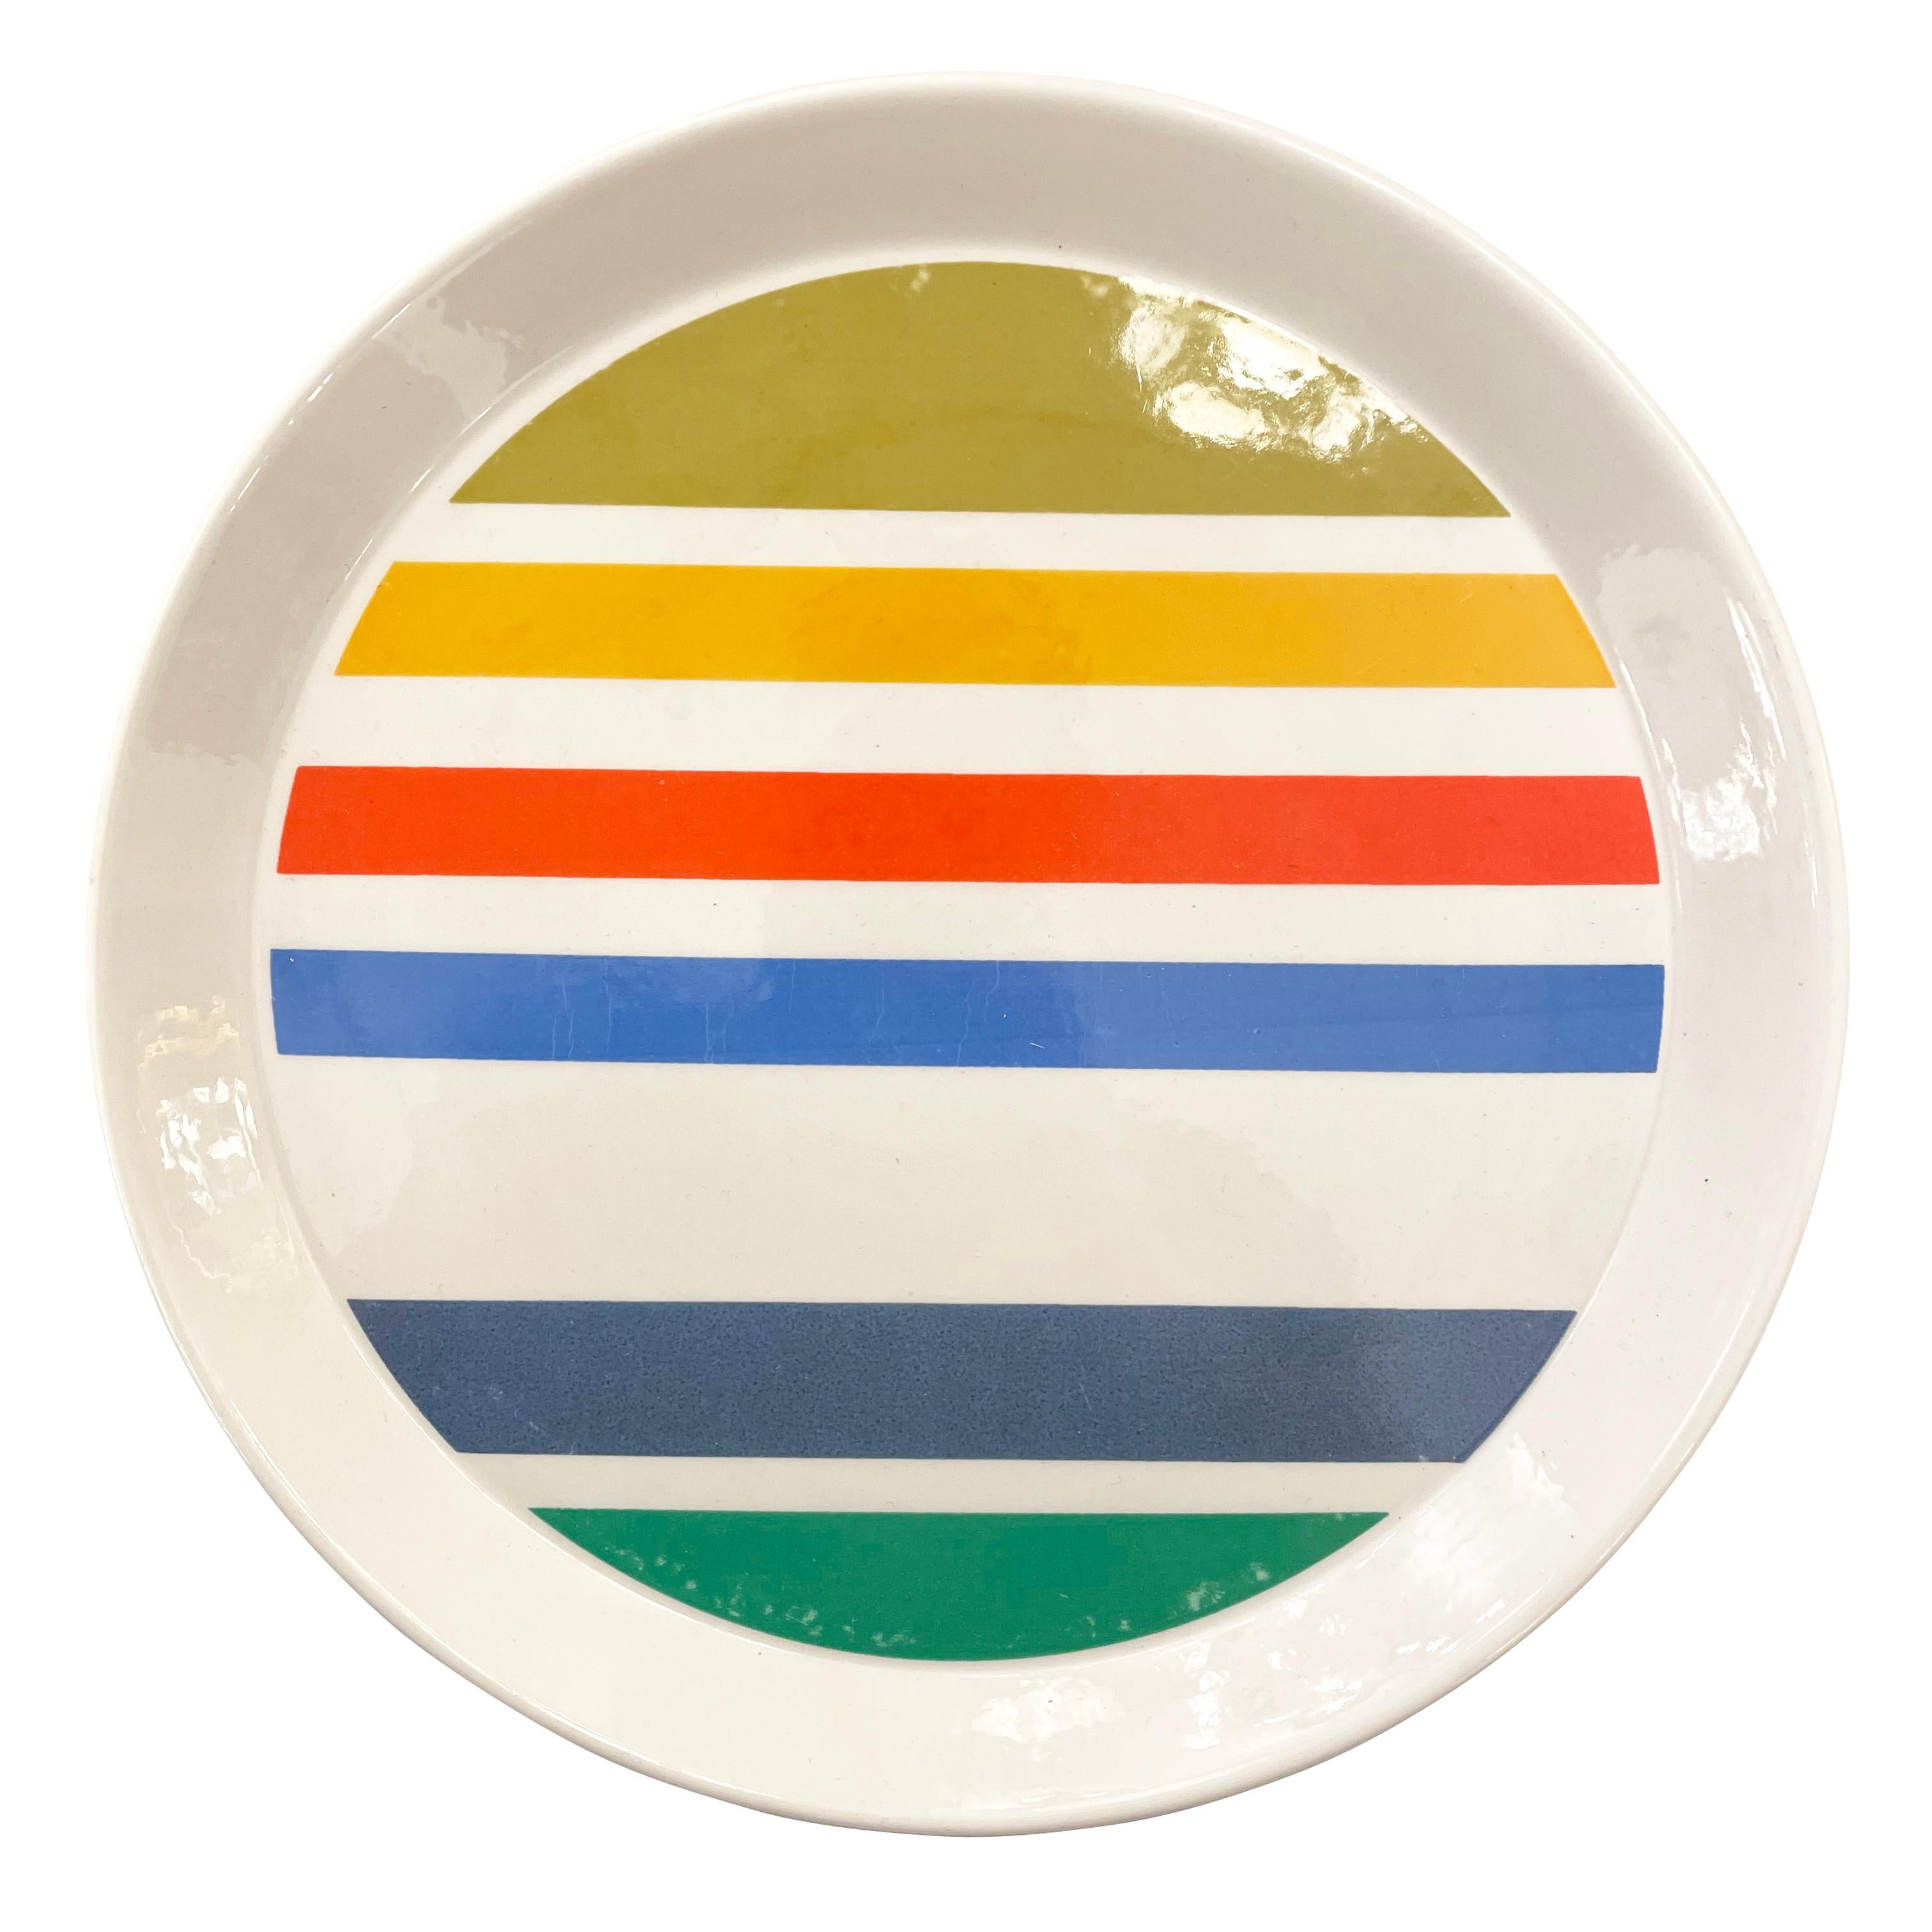 Decorative plate designed by Gio Ponti for Ceramiche Franco Pozzi as part of his “Fantasia Italiana” series. Signed on the back. Two others with different pattern also available.

Condition: Excellent vintage condition, minor wear consistent with